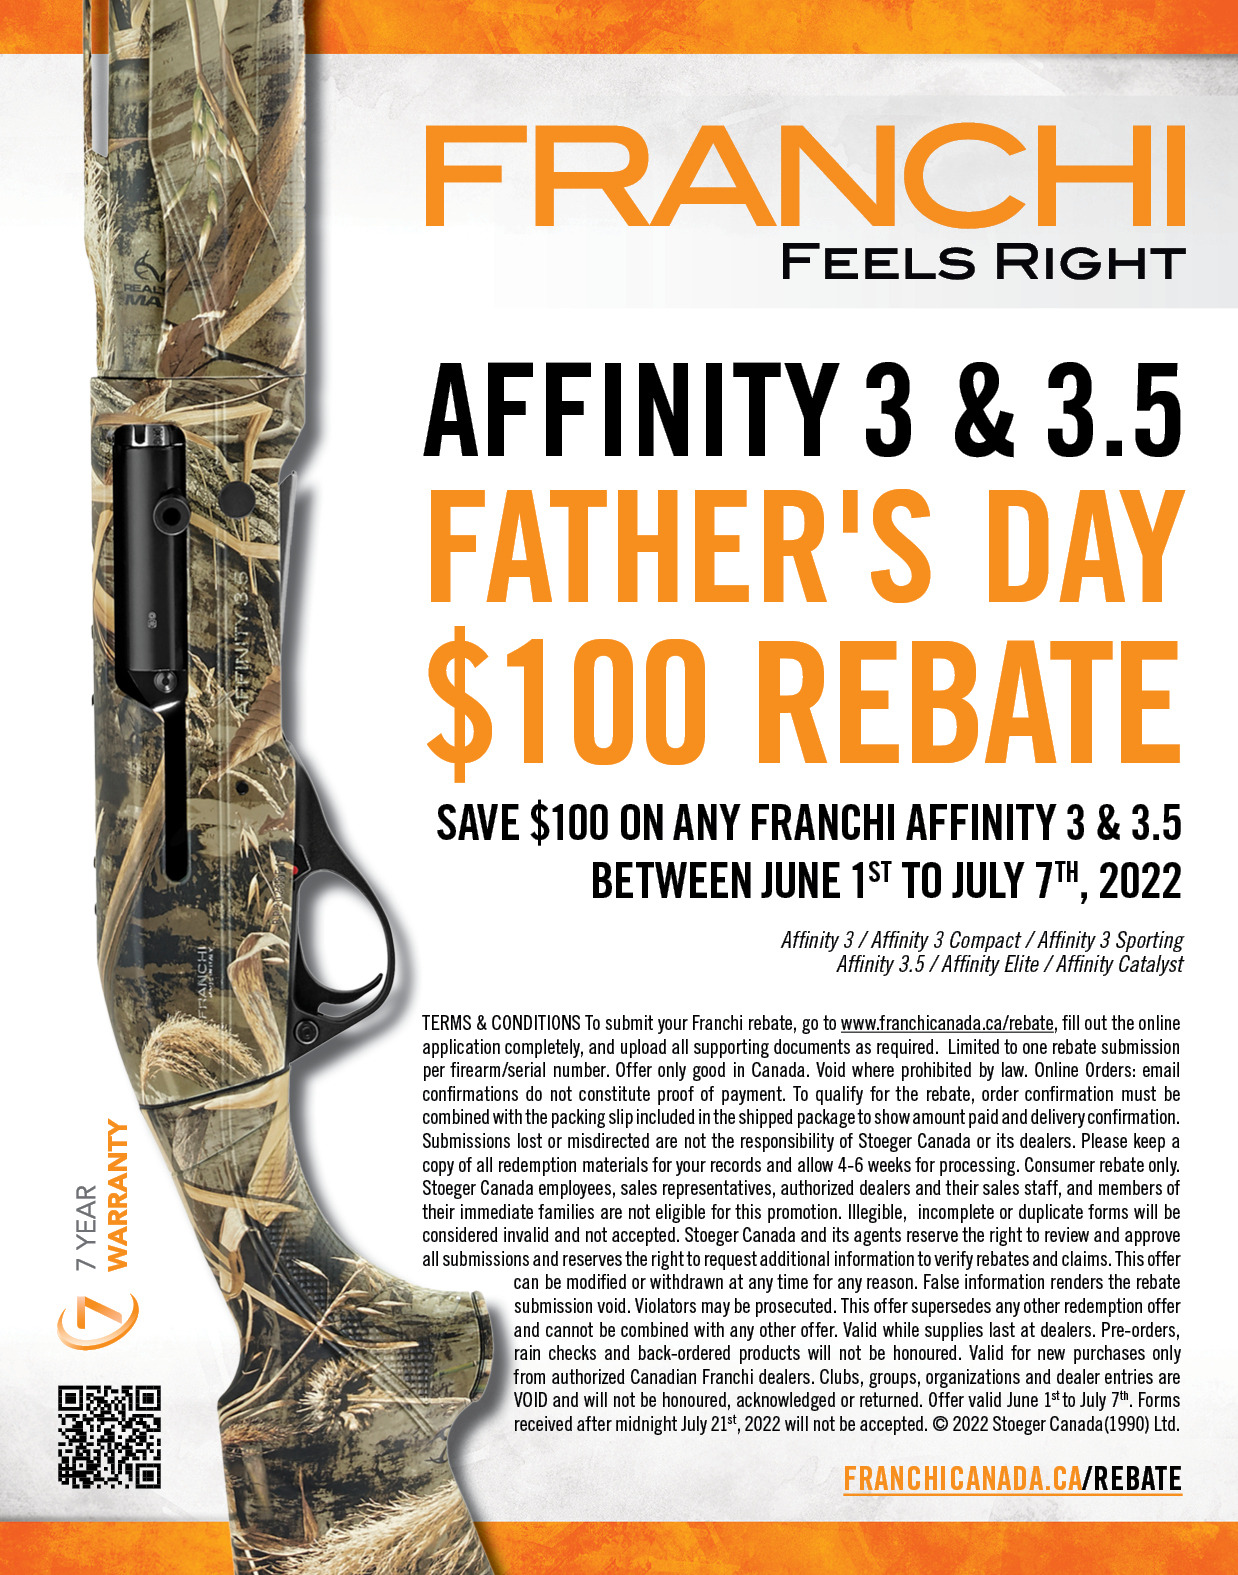 Franchi Affinity Rebate 2022 Poster And Terms